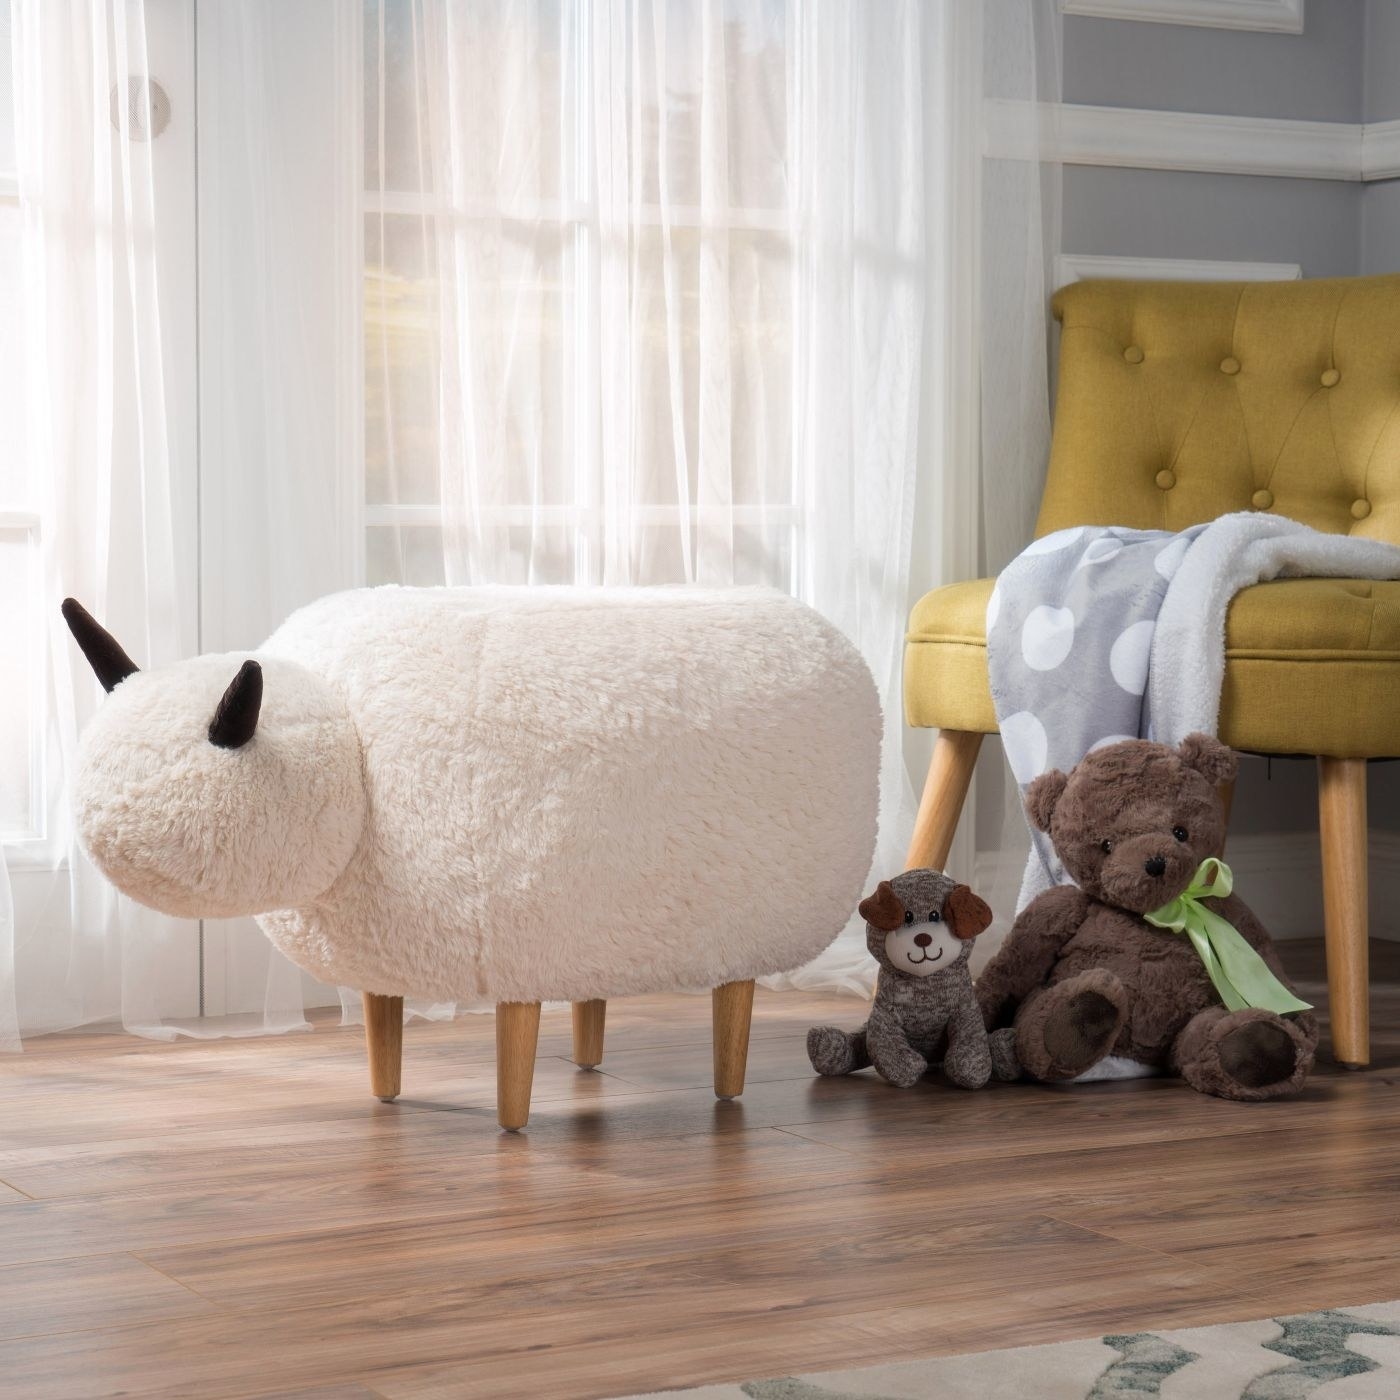 Fluffy white sheep ottoman in front of a mustard armchair with a blanket draped on top